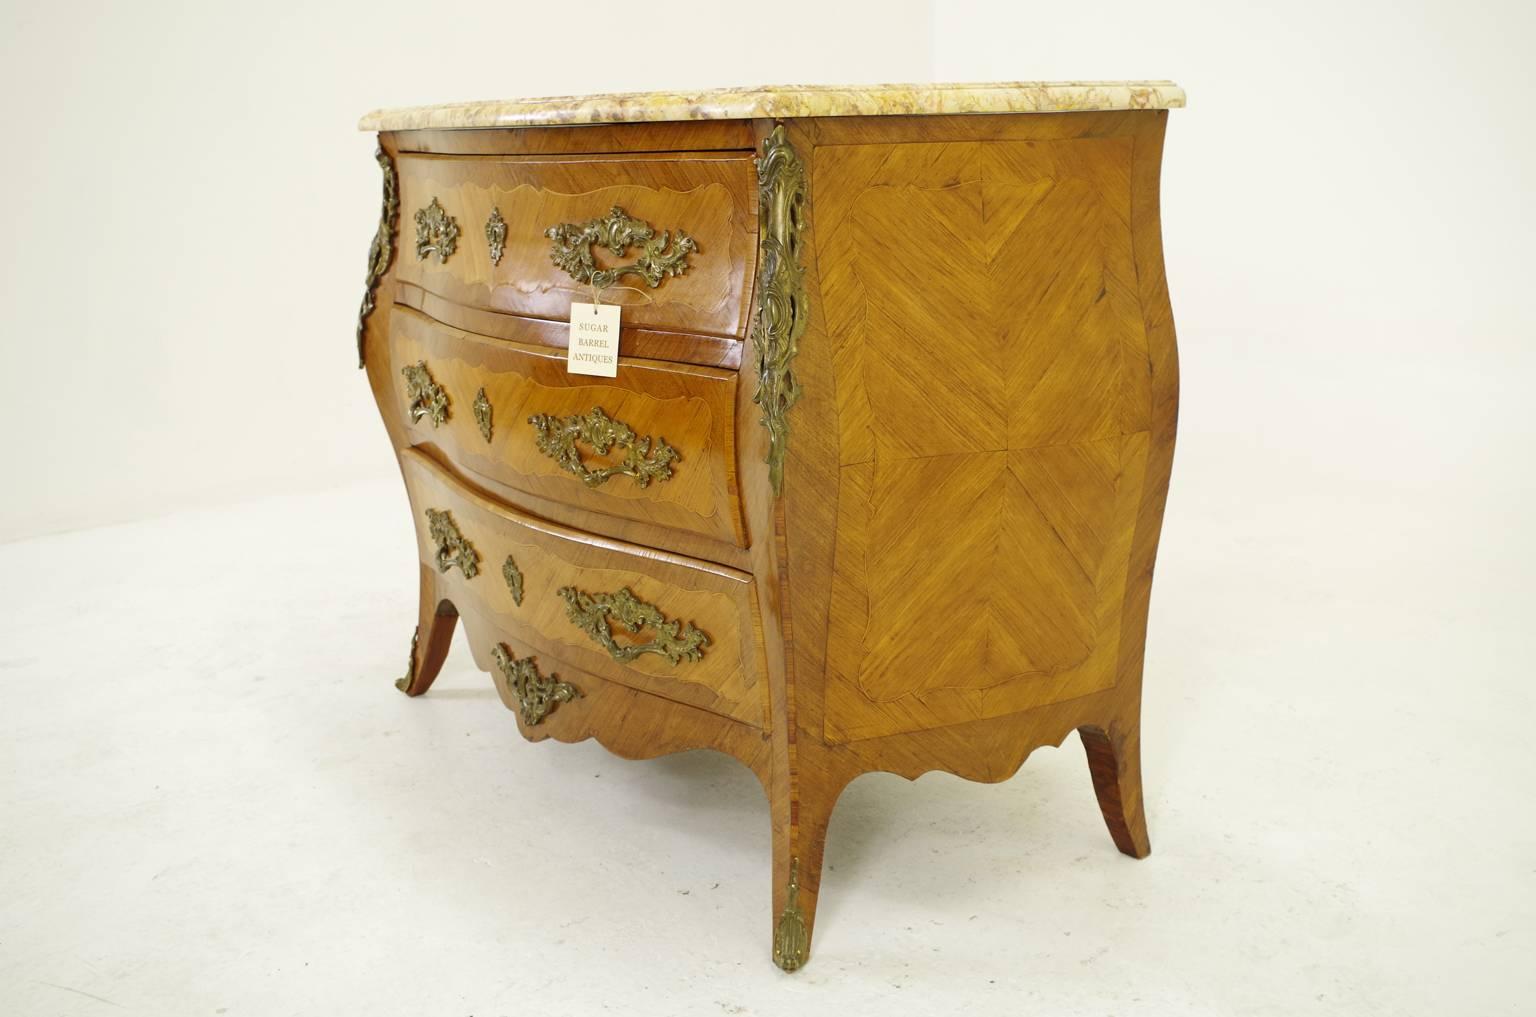 $3250.00.
France, 1930.
Original marble top, moulded edge.
Three long drawers, bronze pulls, escutcheons.
Flanked by gilt bronze corners.
Splayed legs with sabots.
Wonderful condition.
High quality item.
Normal wear consistent with